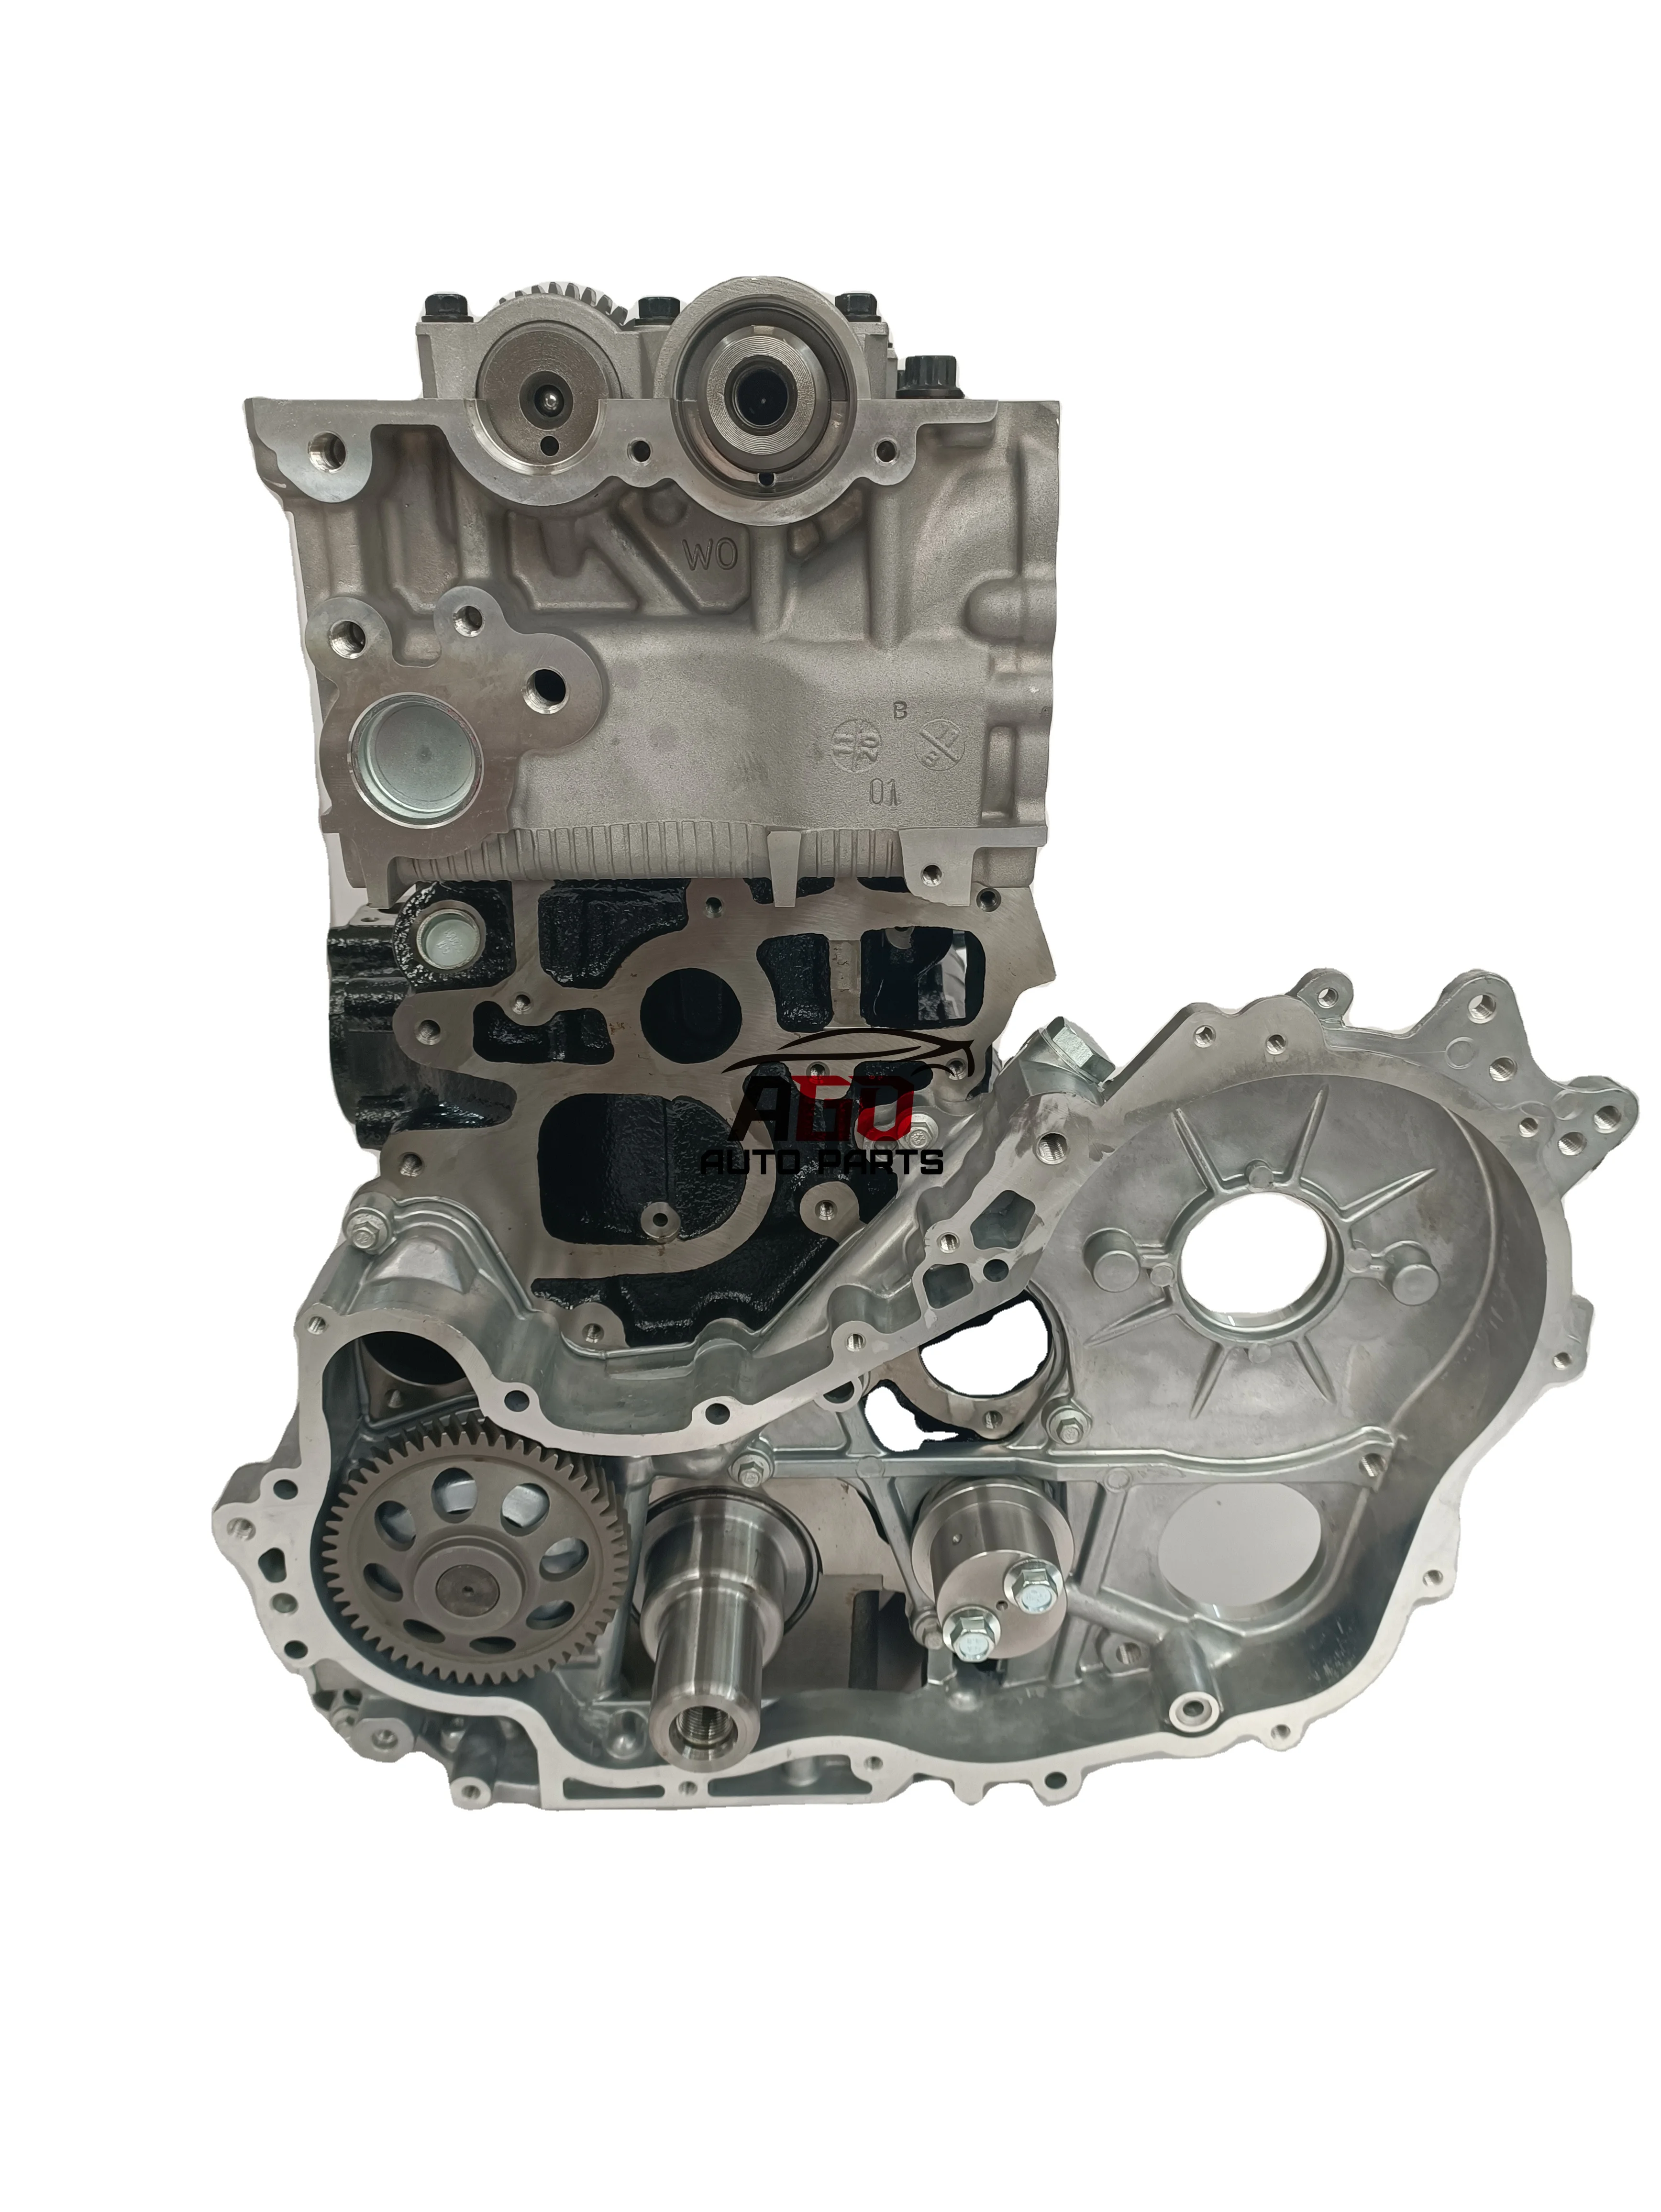 AGO Ready to ship 1KD 2KD 2KD-FTV Engine Long Block Diesel Engine for Toyota Hilux HIACE ZD25 DK4 KD4B 2KD Complete Engine New